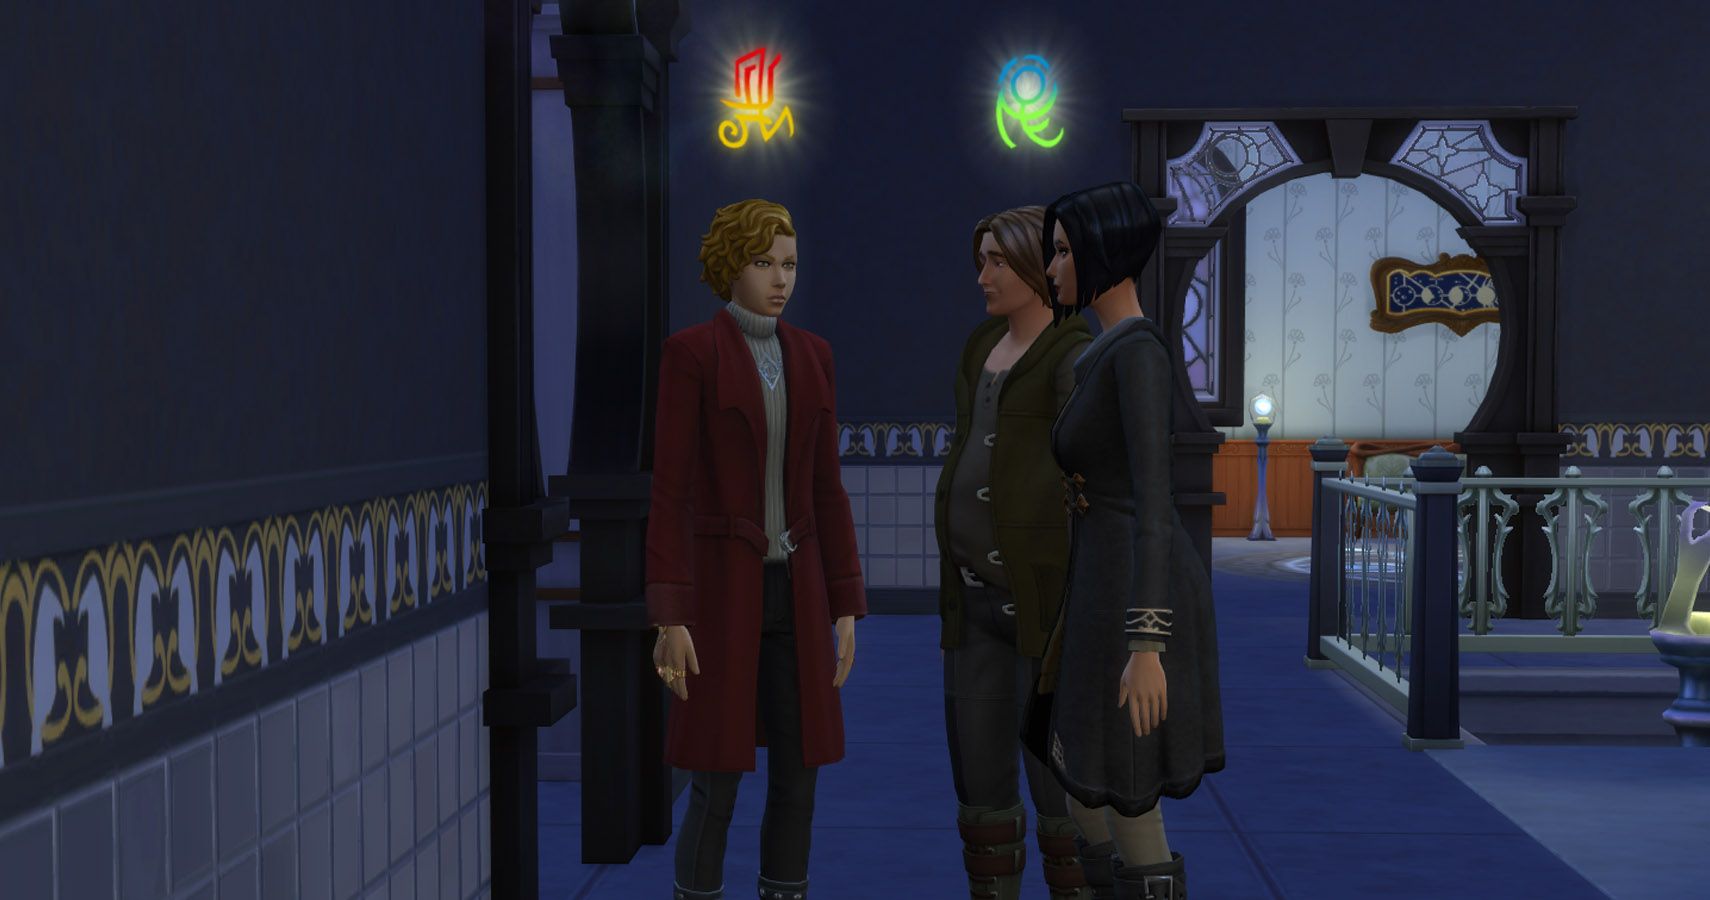 Making Magic How To Get Started As A Spellcaster in The Sims 4 Realm Of Magic